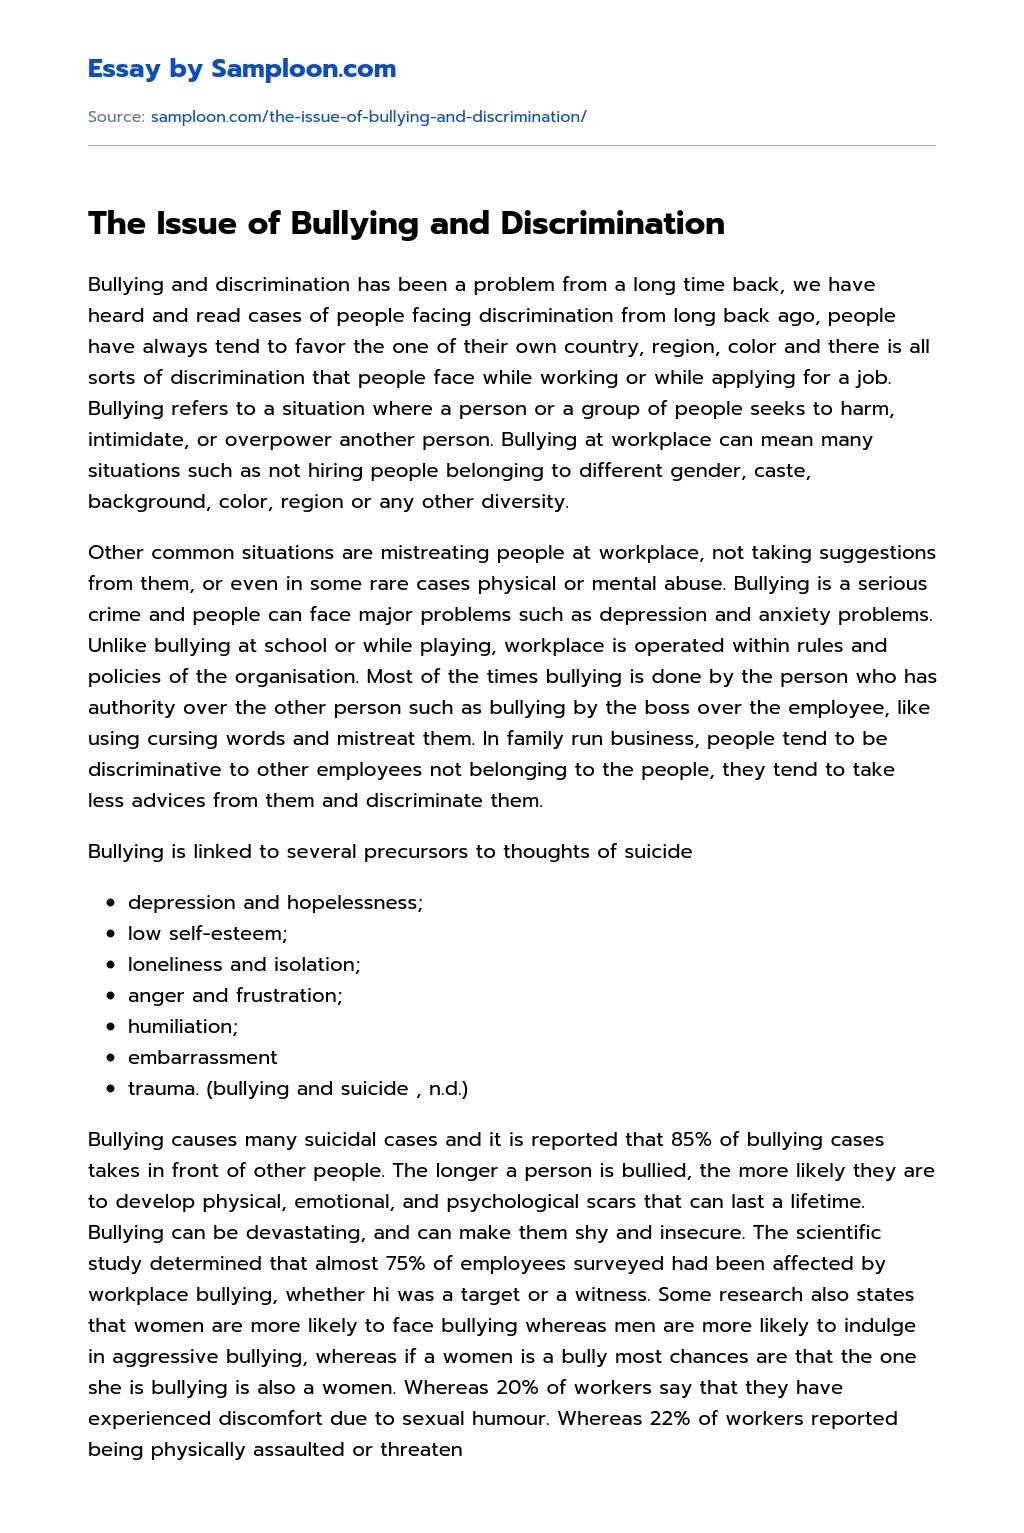 The Issue of Bullying and Discrimination Informative Essay essay